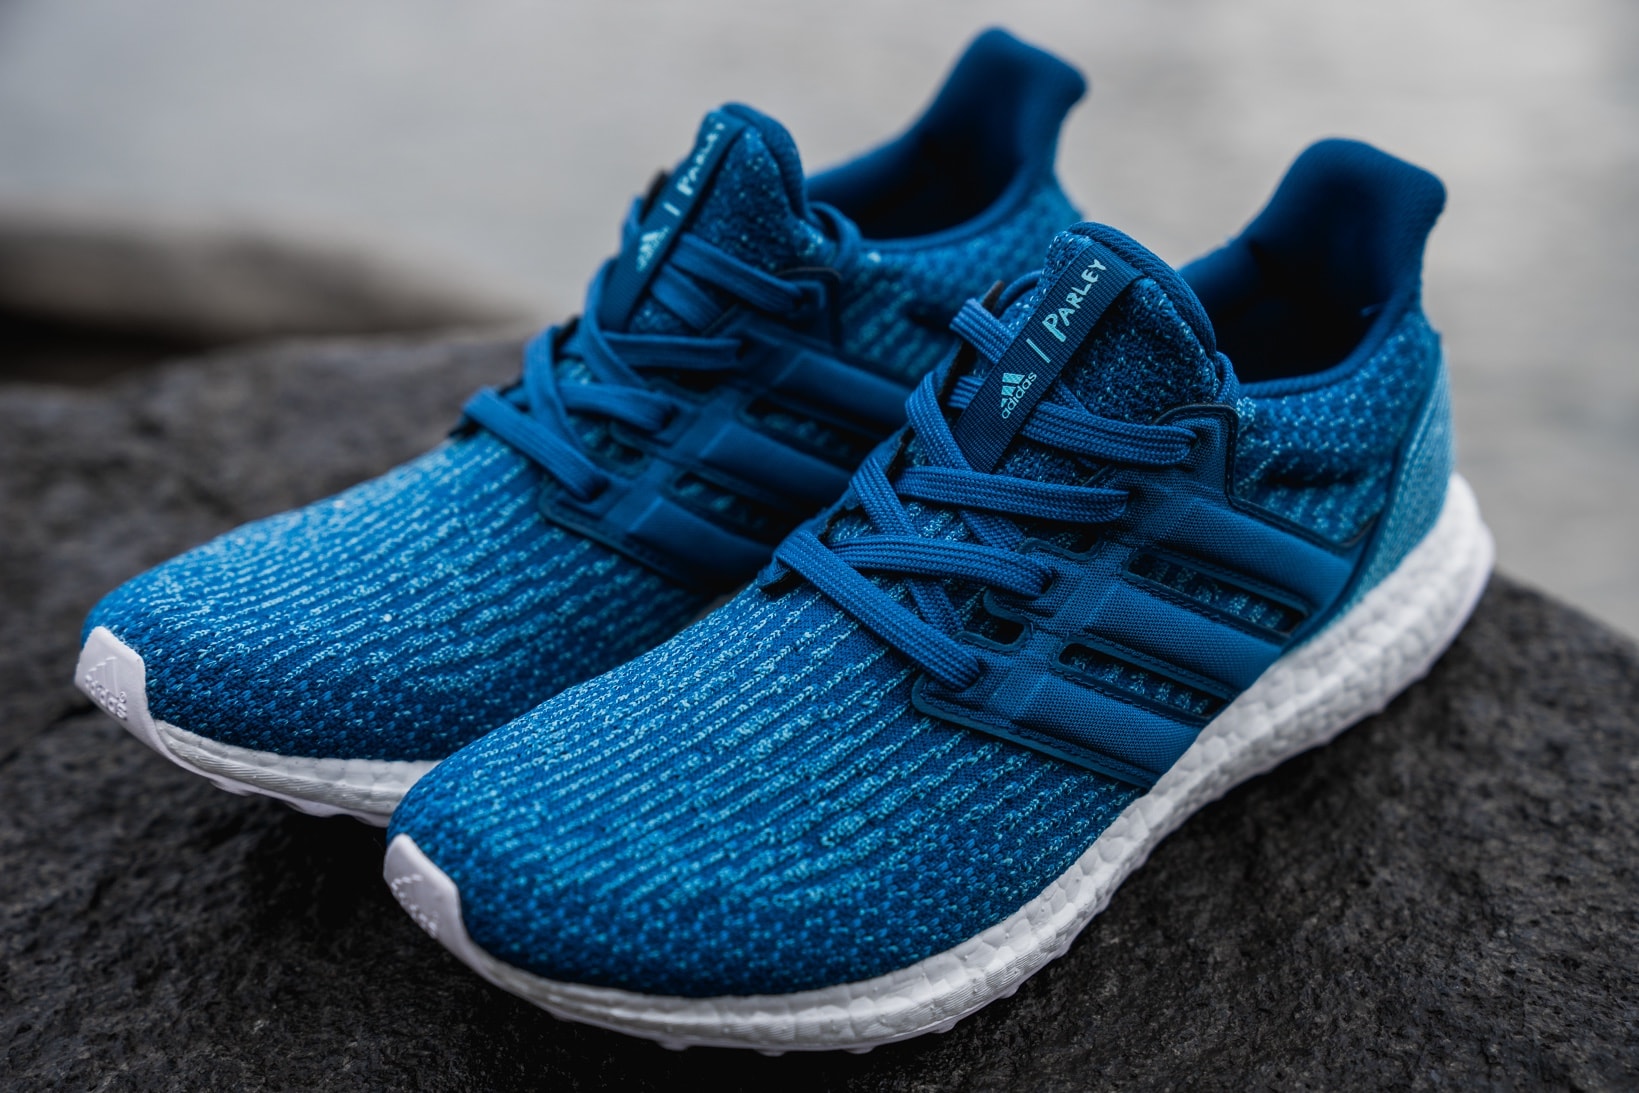 adidas x Parley for the Oceans UltraBOOST 3.0 Closer Look